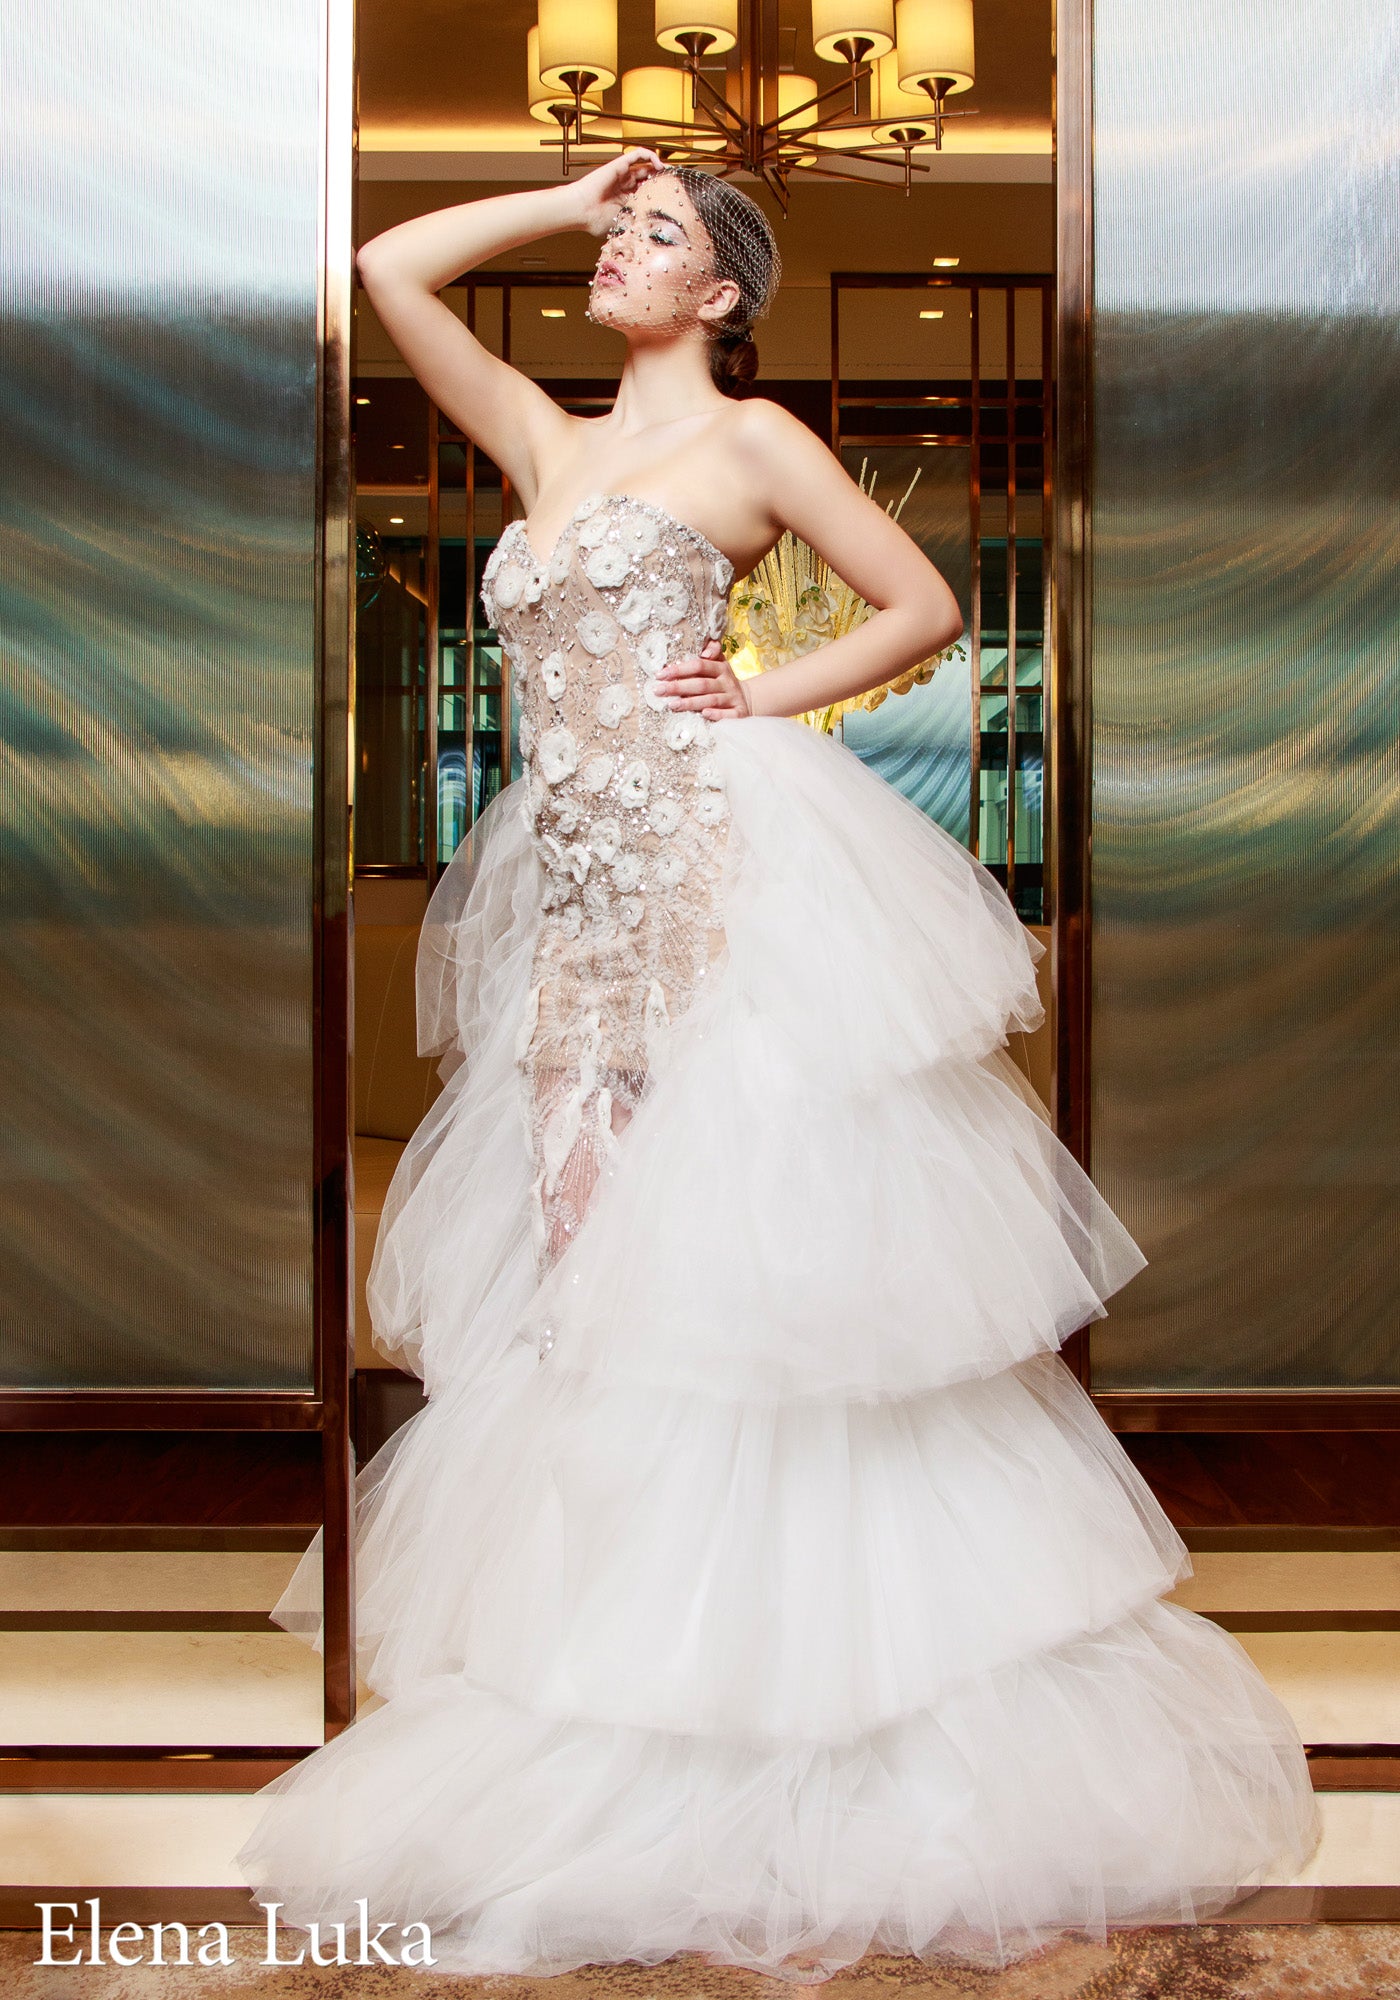 New Elena Luka Bridal Collection To Be Presented at The 10th Wedding Fair